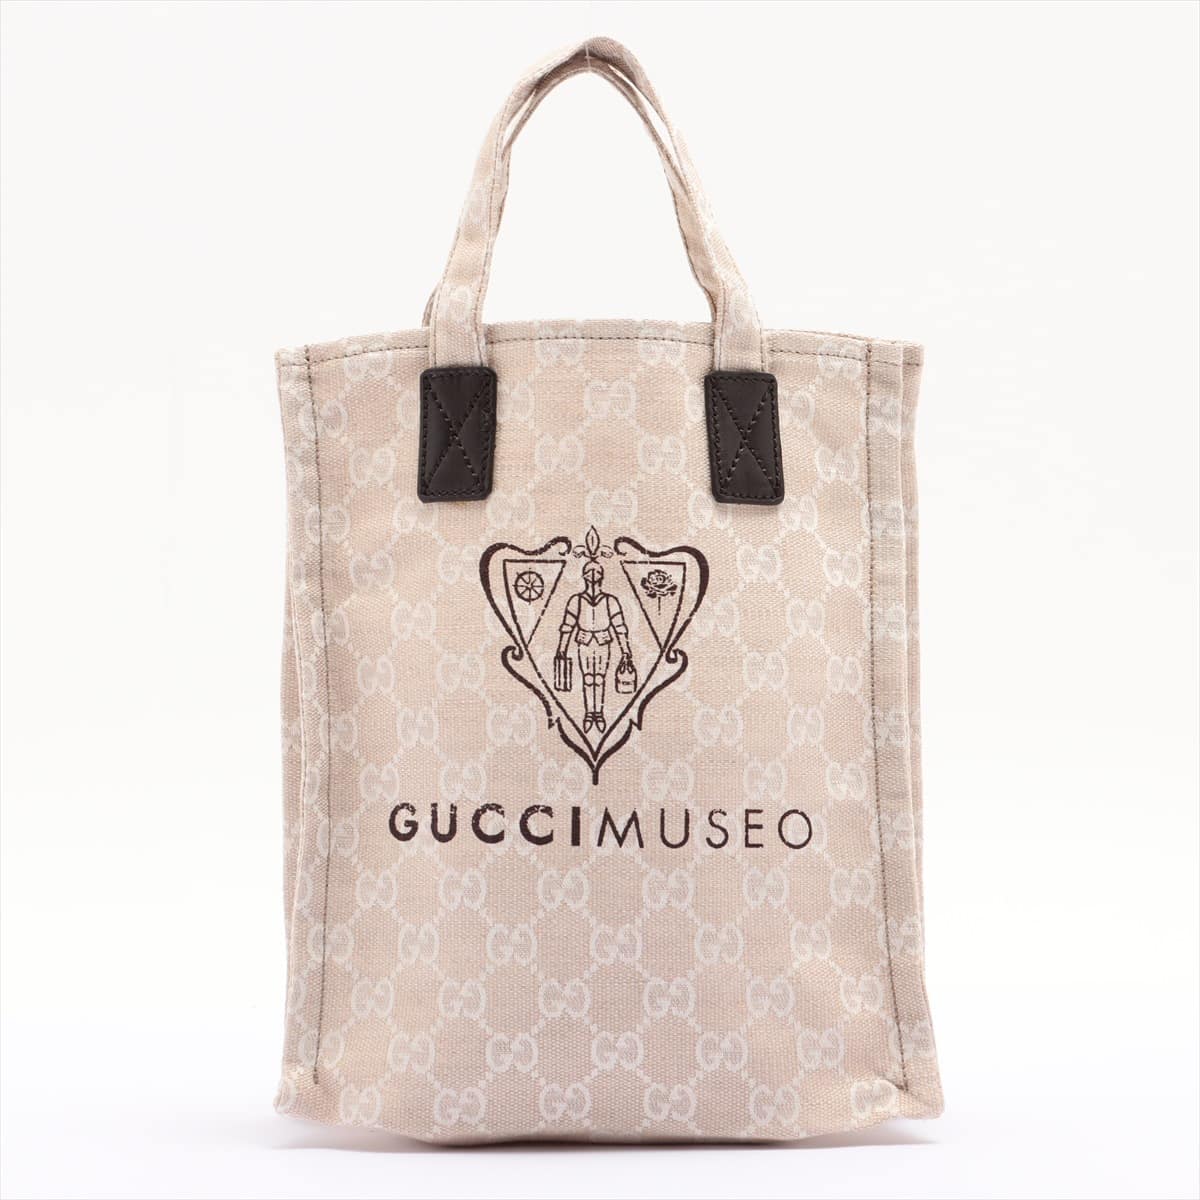 Gucci Museo canvas Hand bag Beige 283414